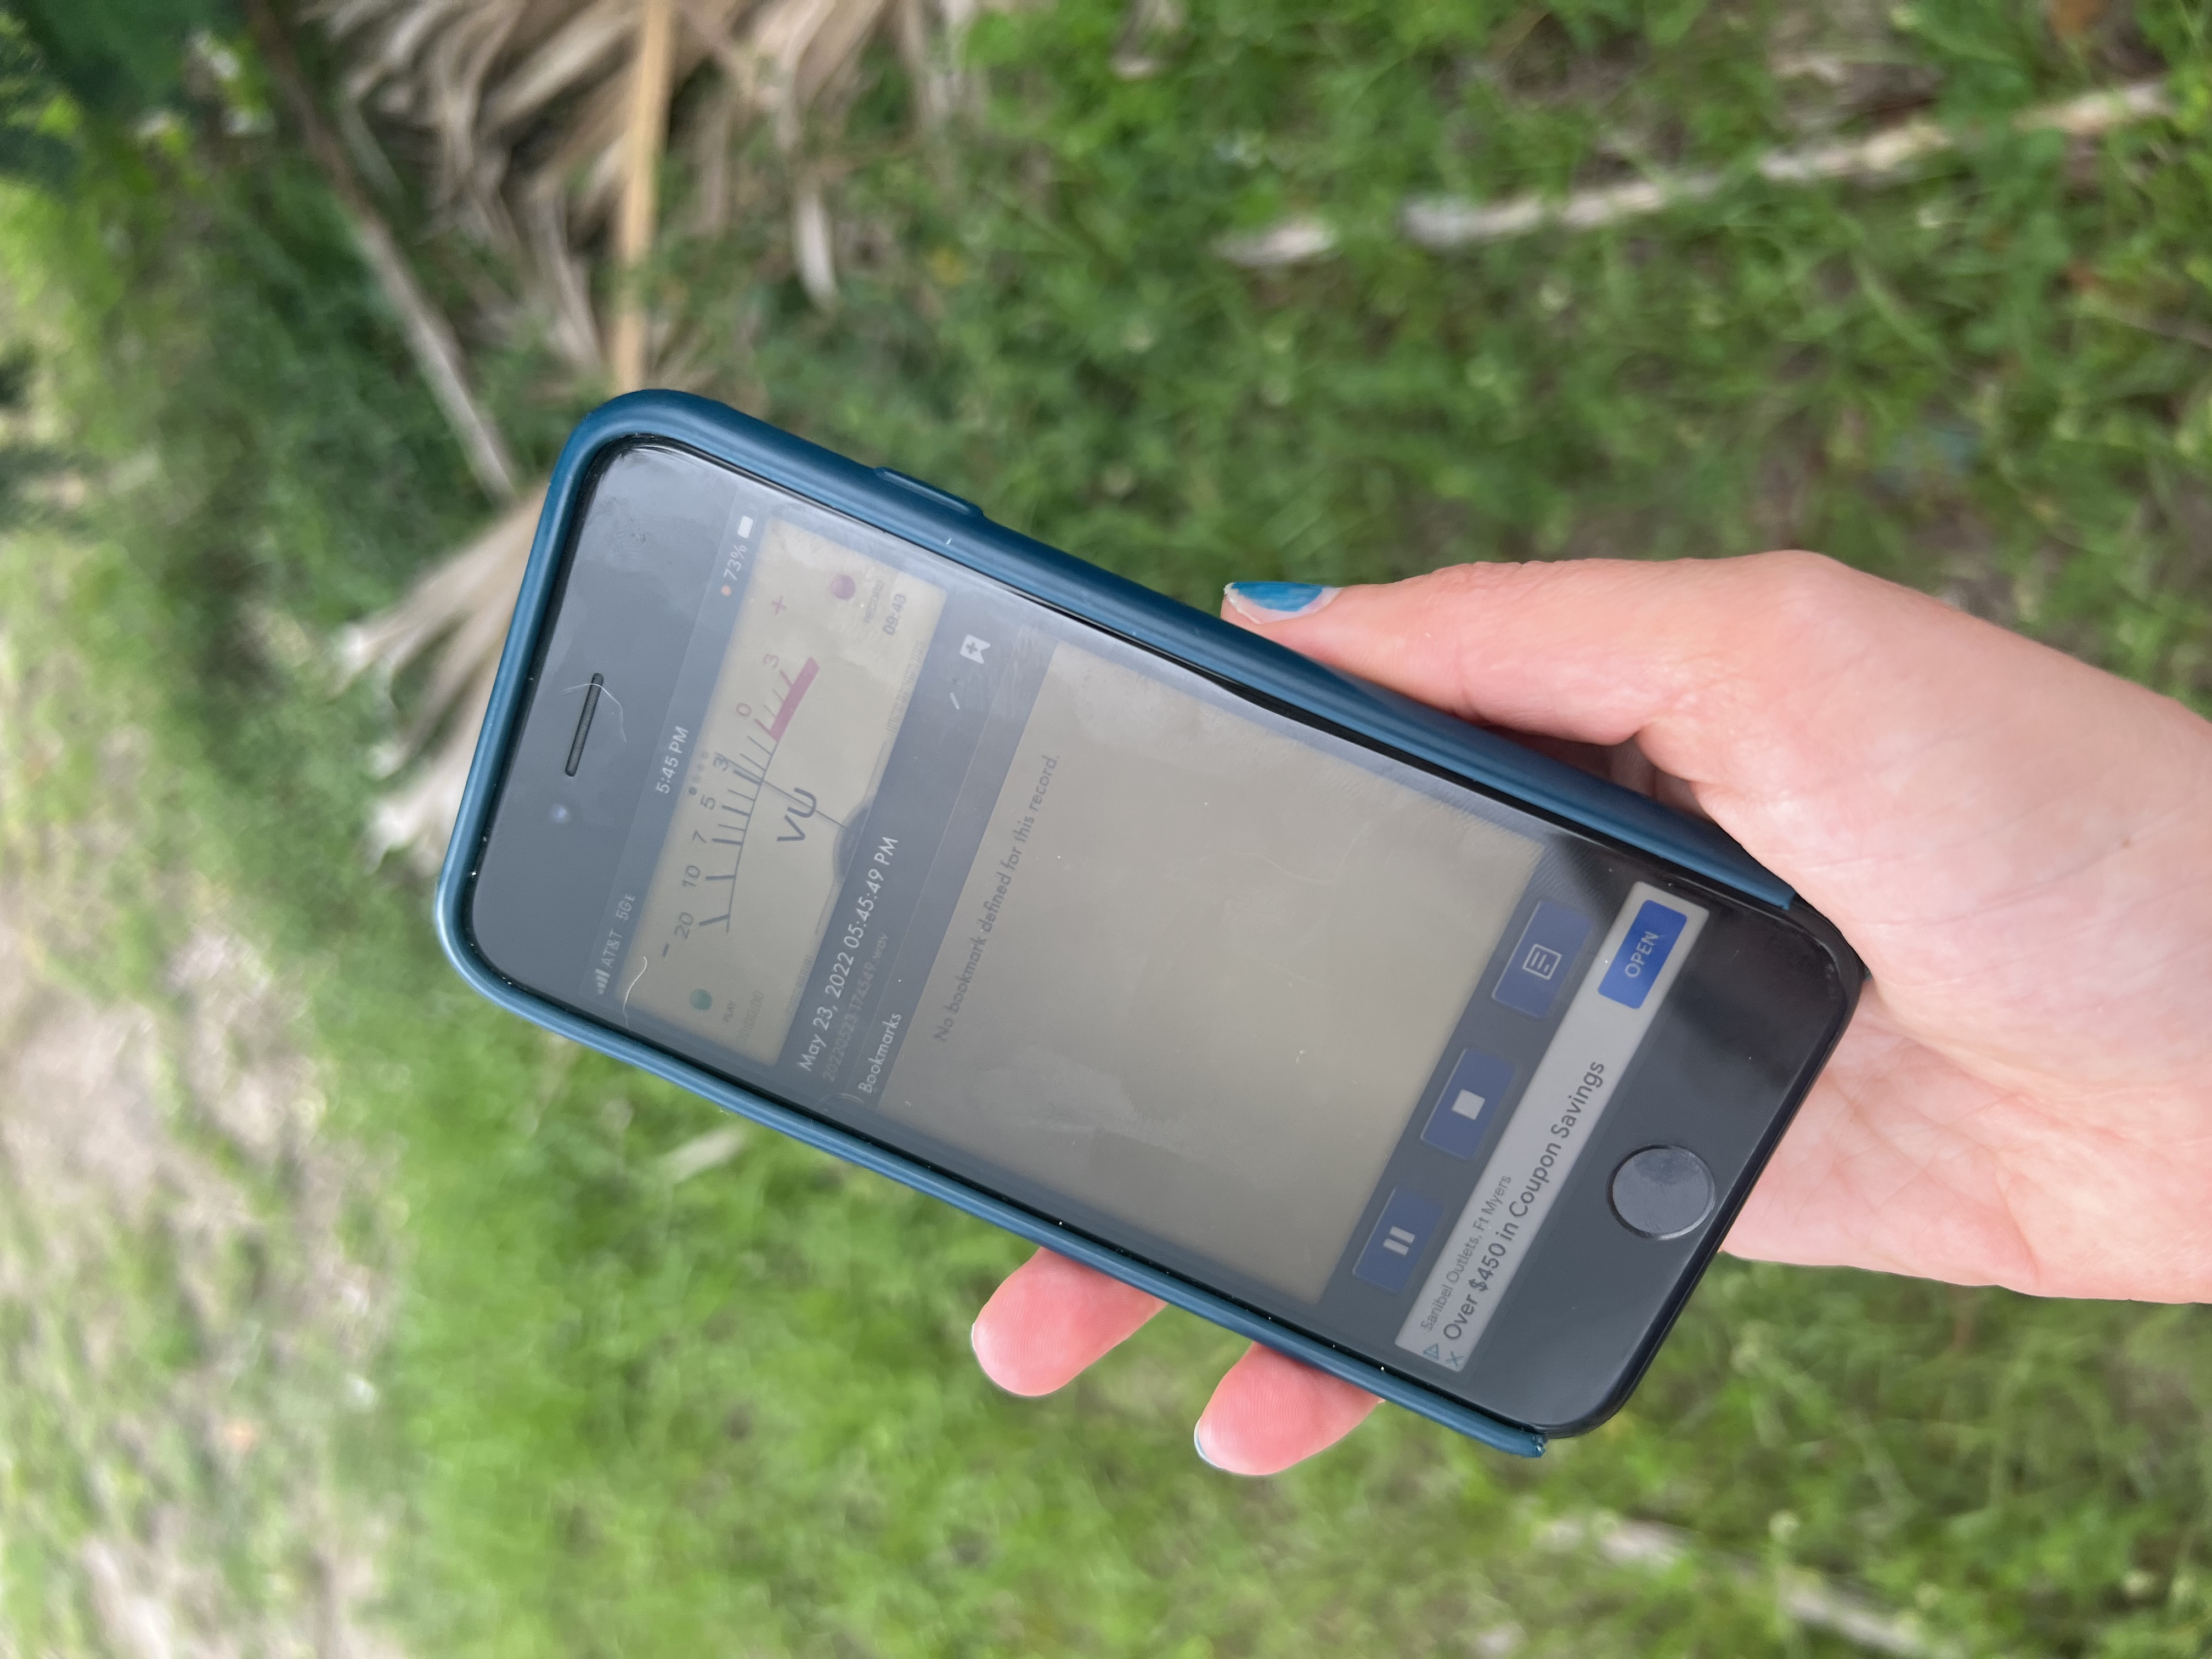 Recording soundscapes using a smartphone